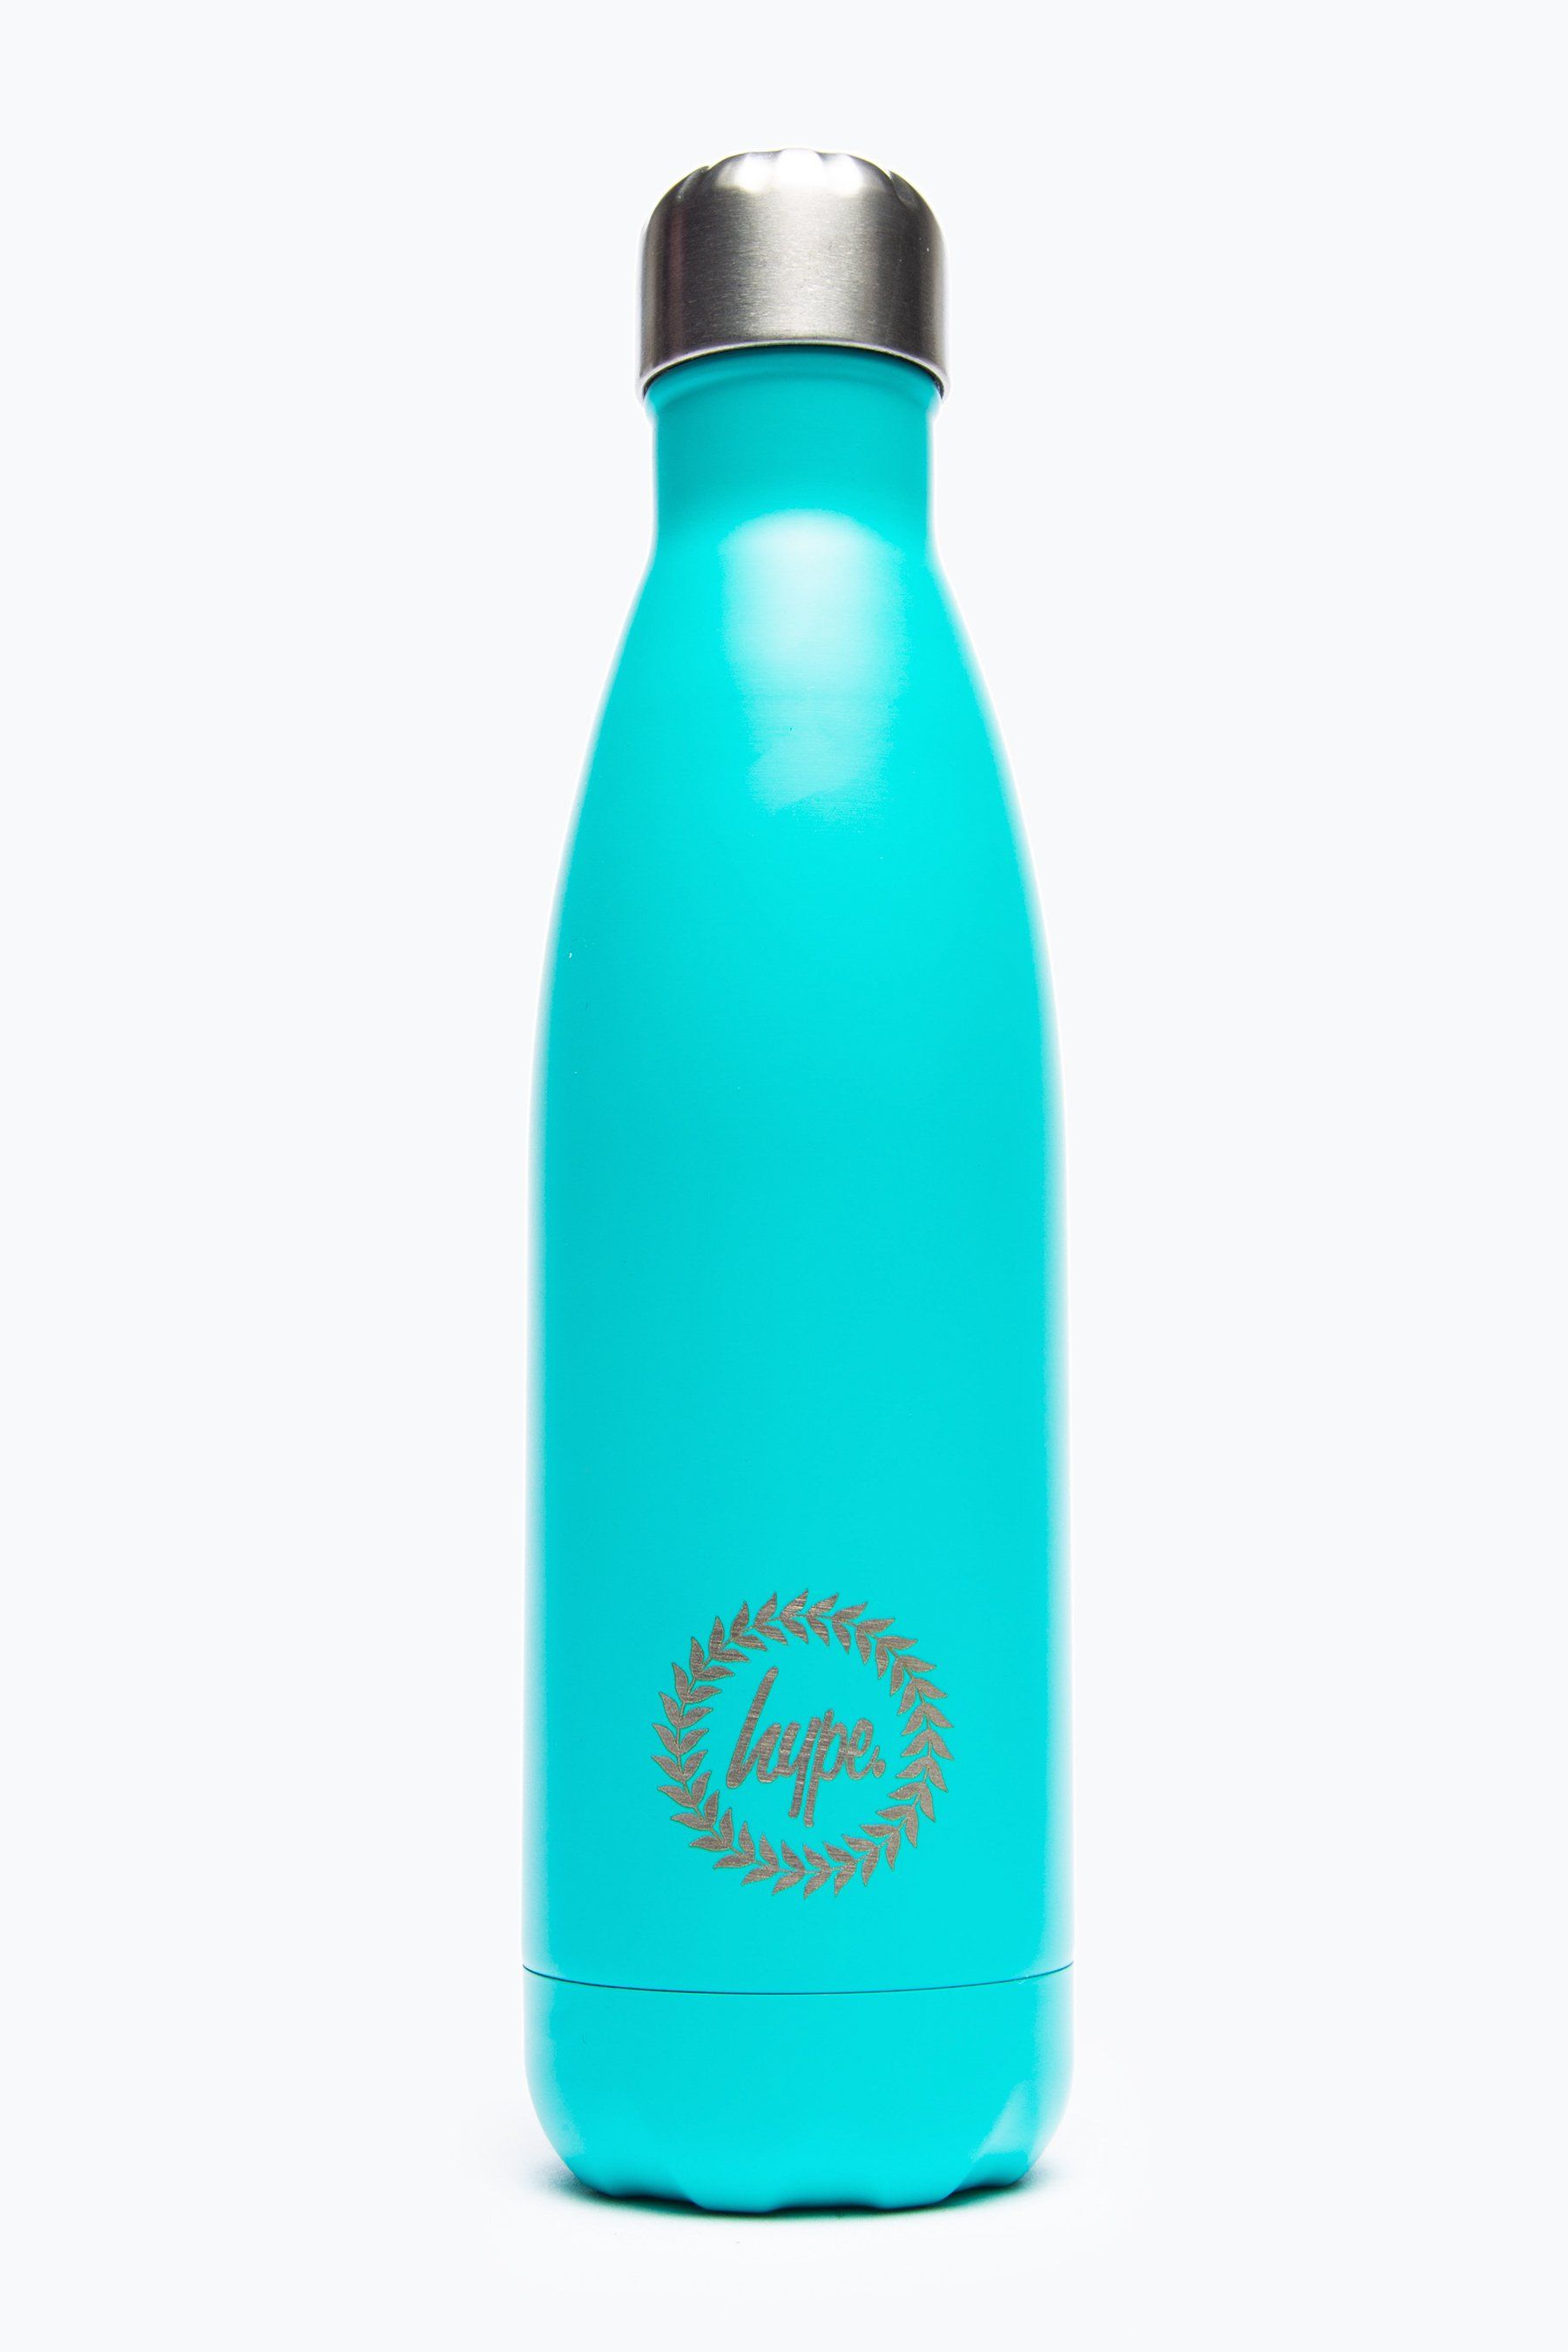 Keeping you hydrated, in style. Meet the HYPE. Mint Metal Reusable Bottle, perfect for when you're on the go. Designed in BPA-FREE stainless steel aluminium to ensure your water stays ice-cold and for chillier days, keeping your oat milk latte warm for longer. Finished with the iconic HYPE. Crest Logo. Reuse it again and again with an airtight screw lid prevents spills. Why not grab one of our lunch bags or backpacks with a bottle holder to complete the look.